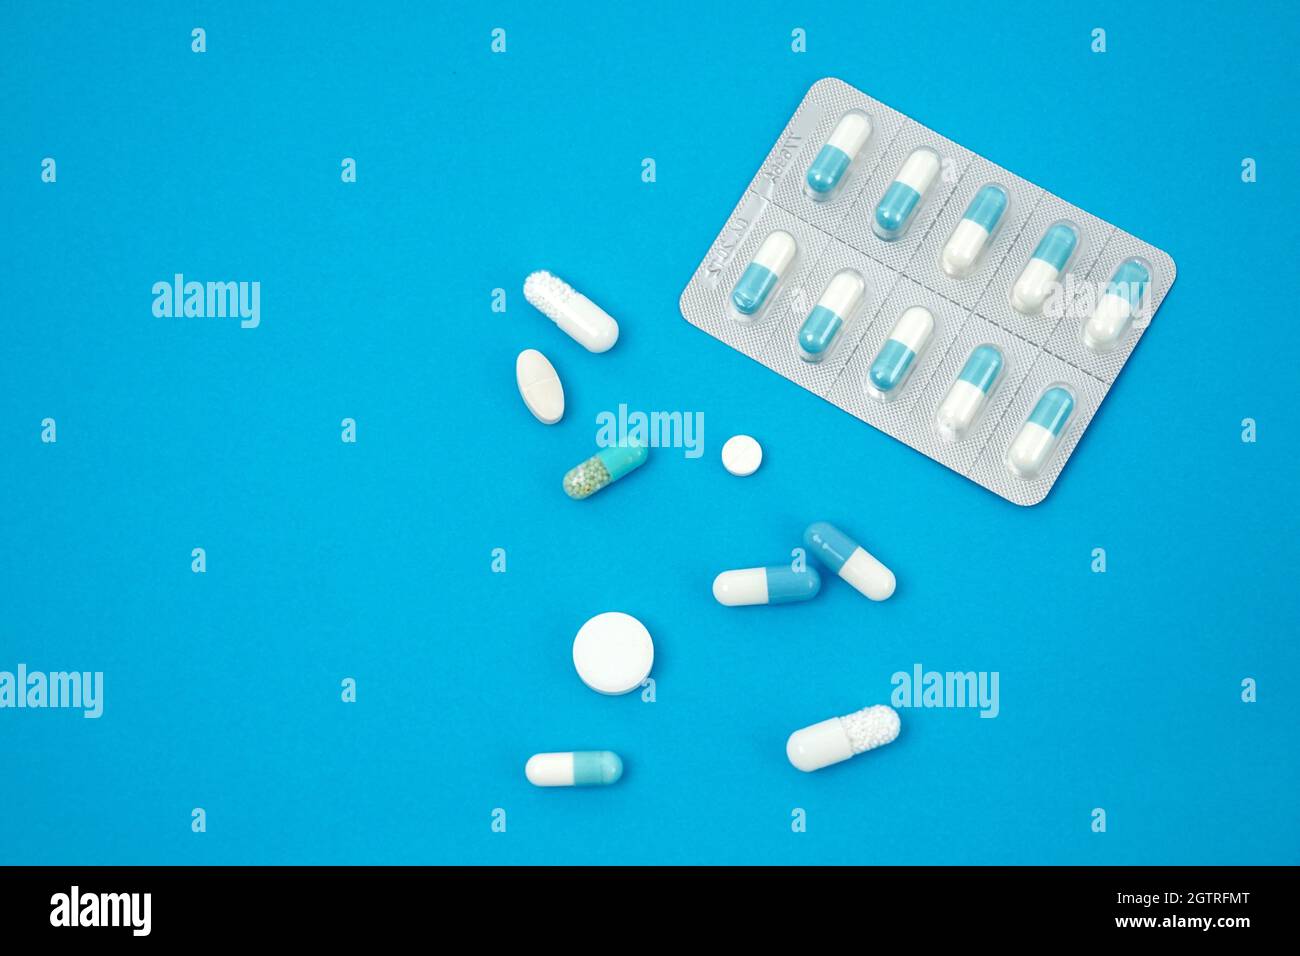 High Angle View Of Medicines Over Blue Background Stock Photo